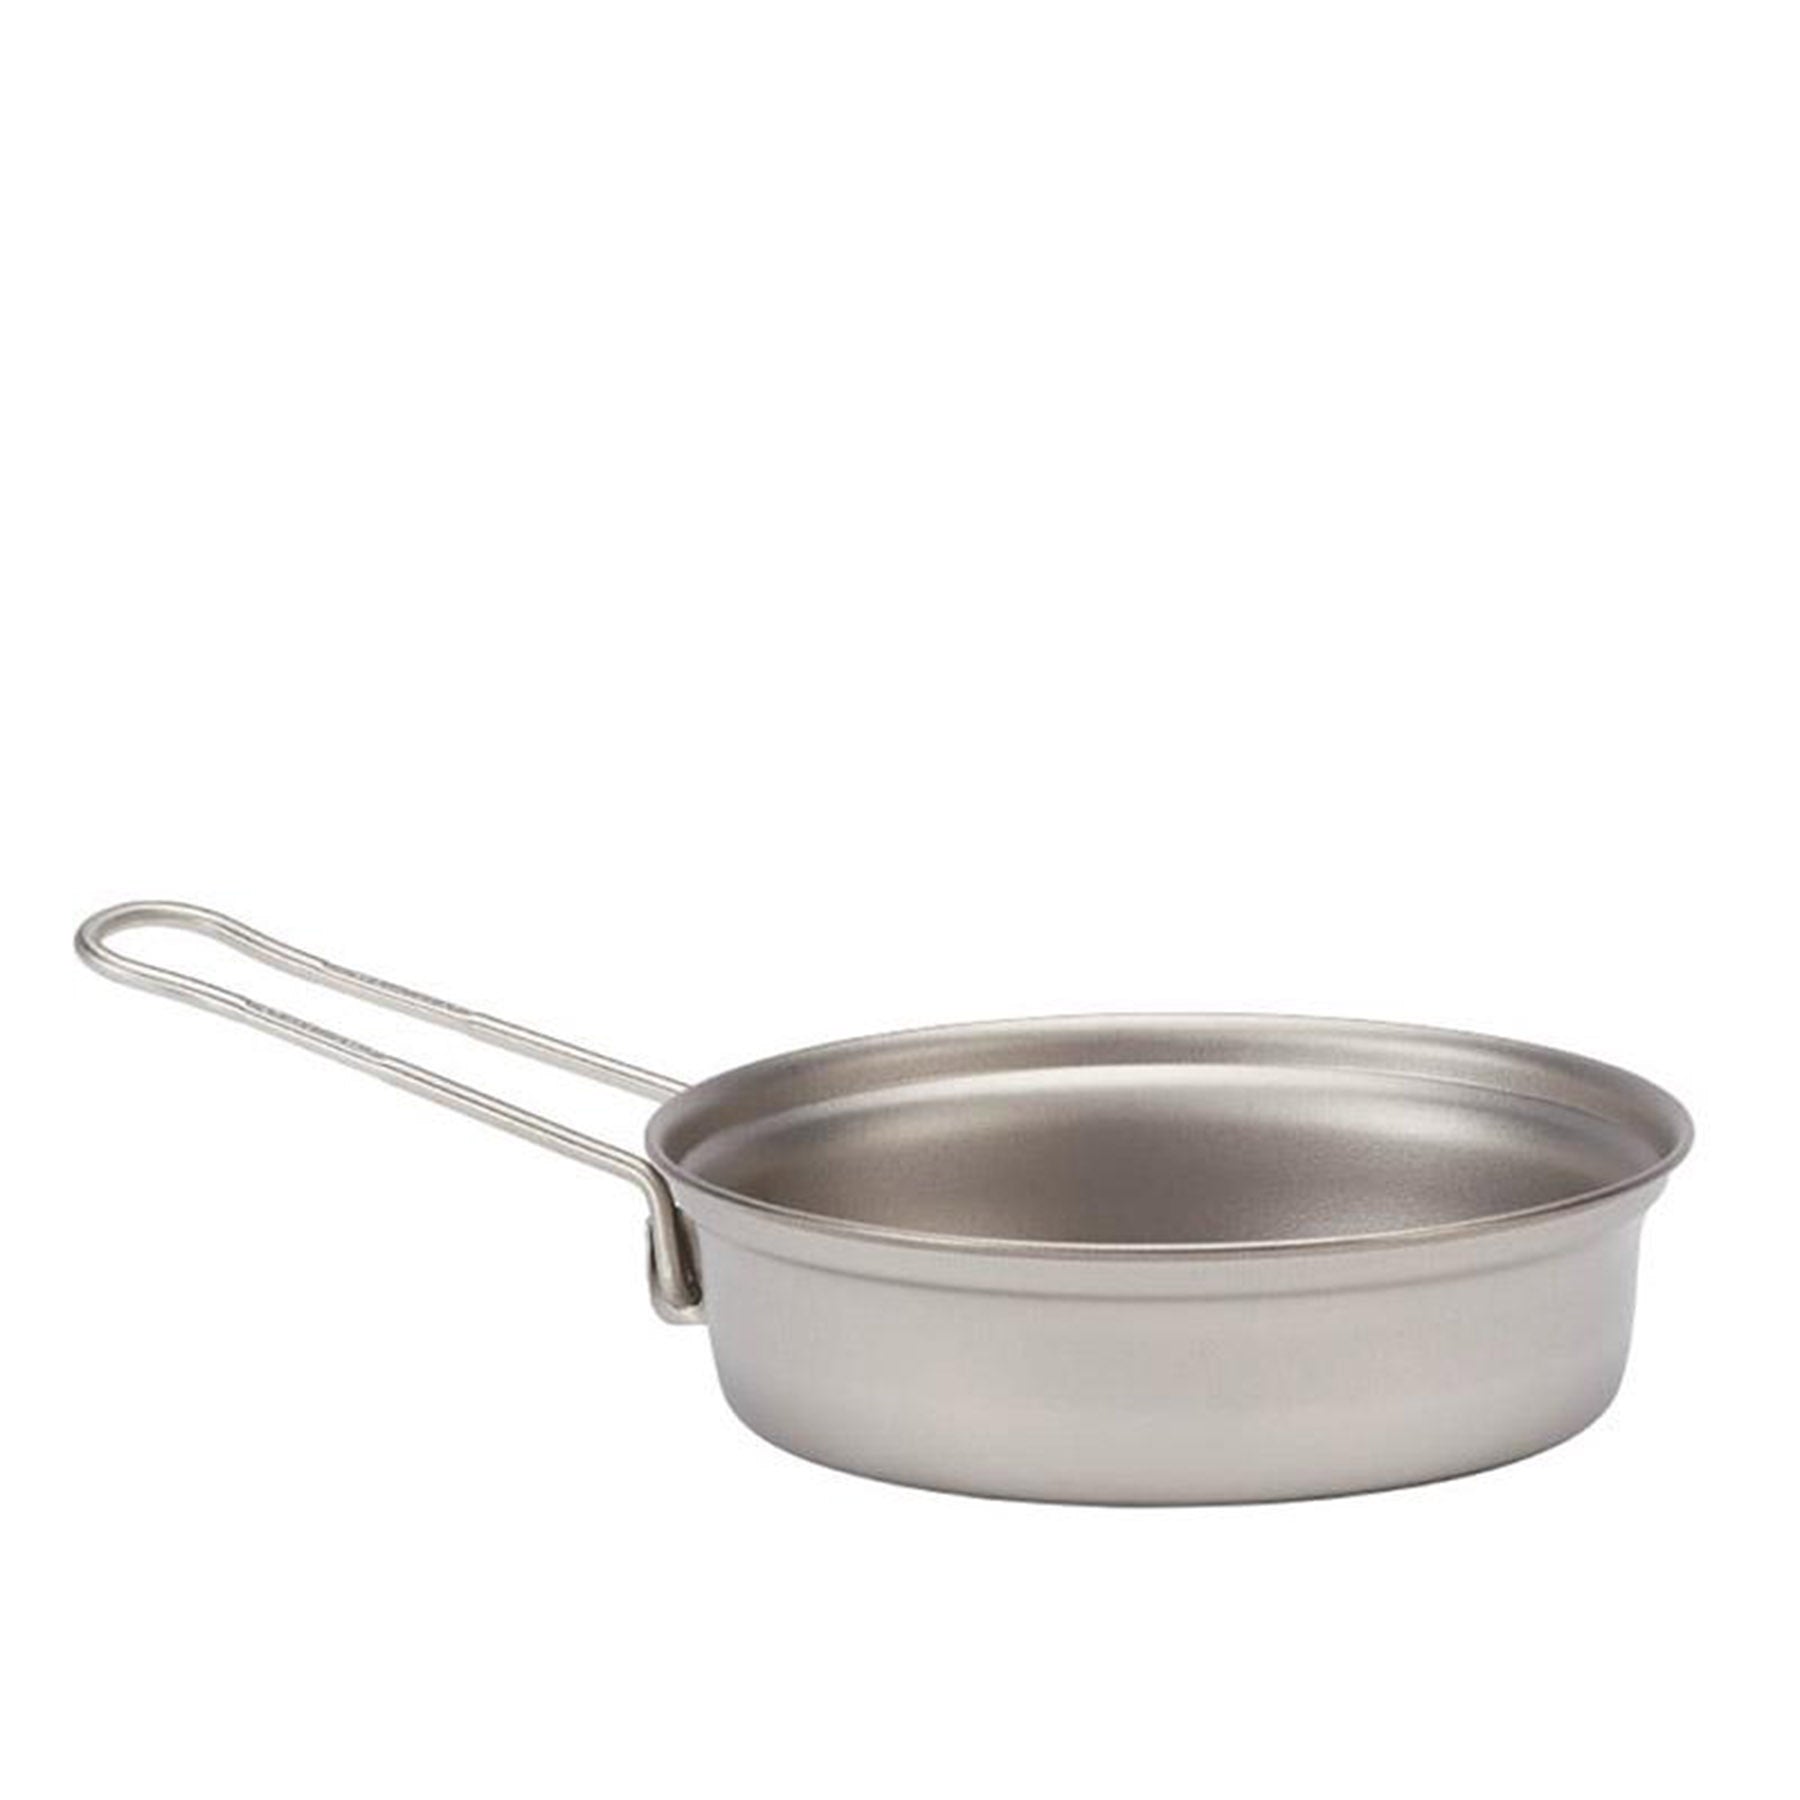 the lid as shallow bowl or fry pan